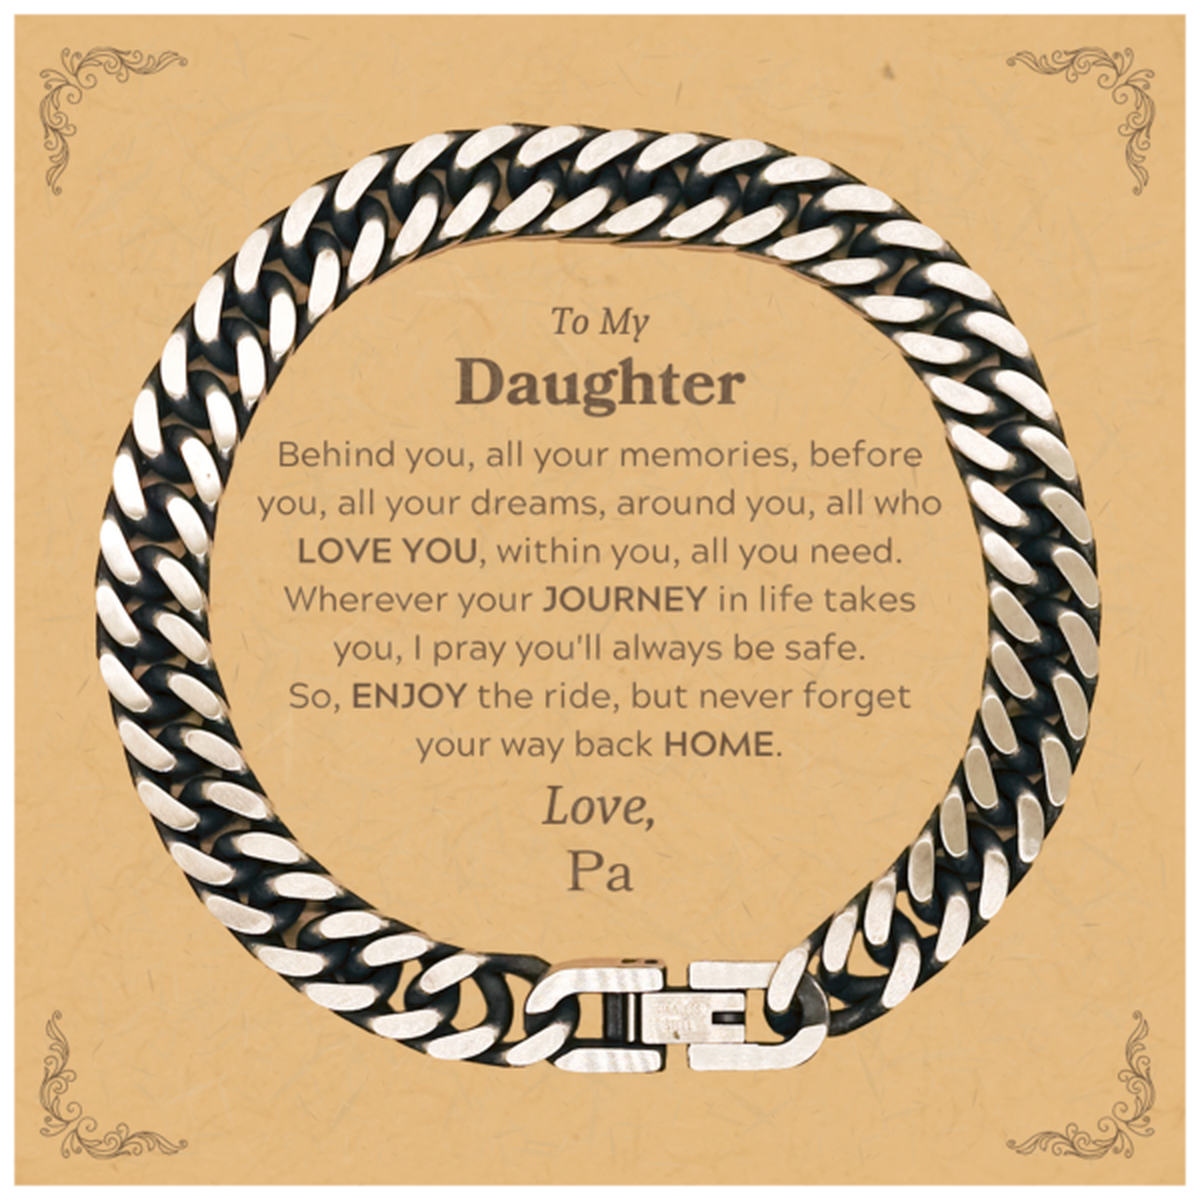 To My Daughter Graduation Gifts from Pa, Daughter Cuban Link Chain Bracelet Christmas Birthday Gifts for Daughter Behind you, all your memories, before you, all your dreams. Love, Pa